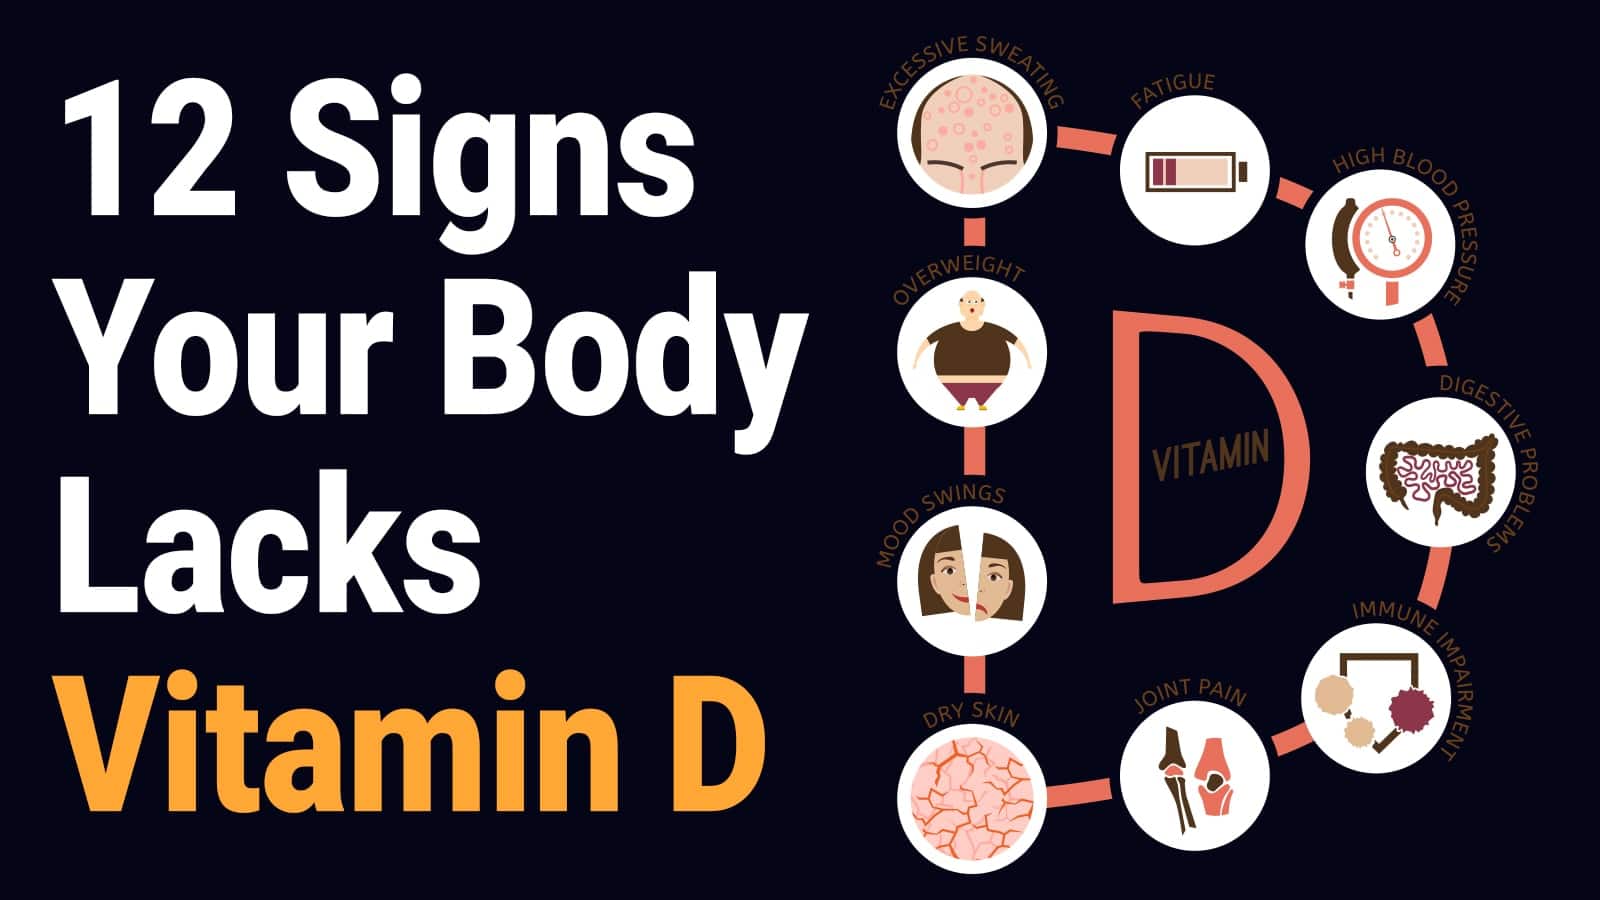 12 Signs Your Body Lacks Vitamin D